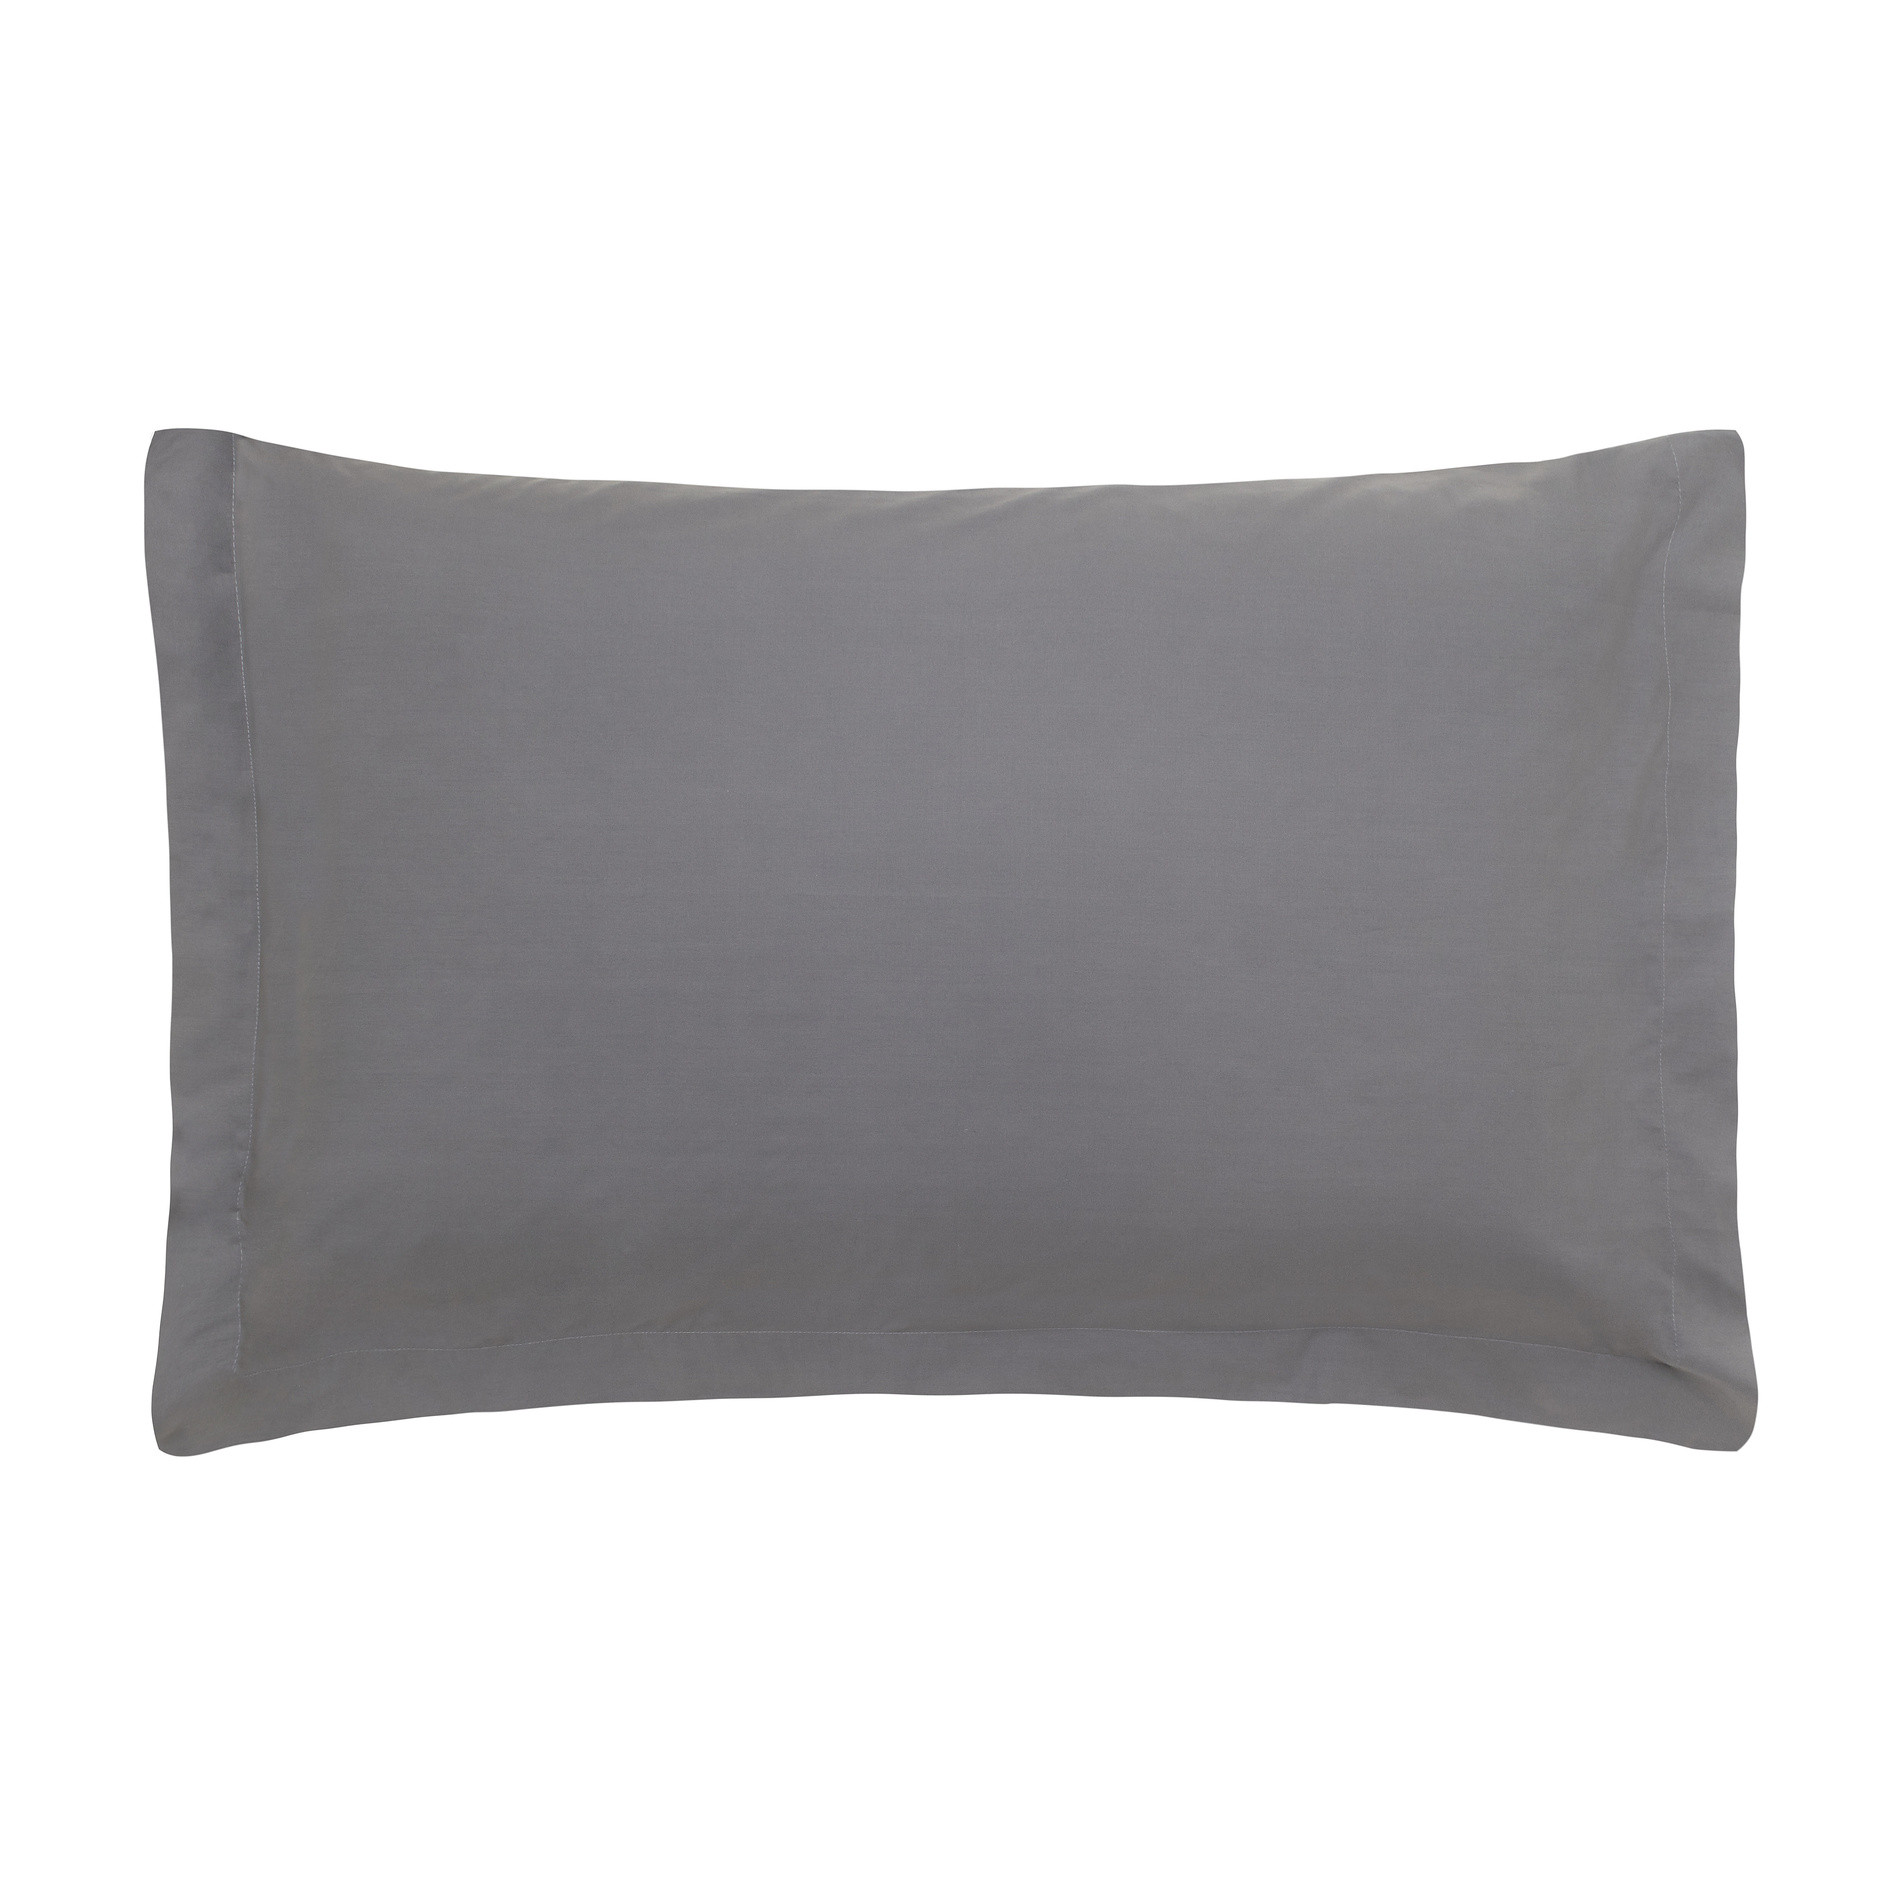 Zefiro solid colour pillowcase in percale., Anthracite, large image number 0